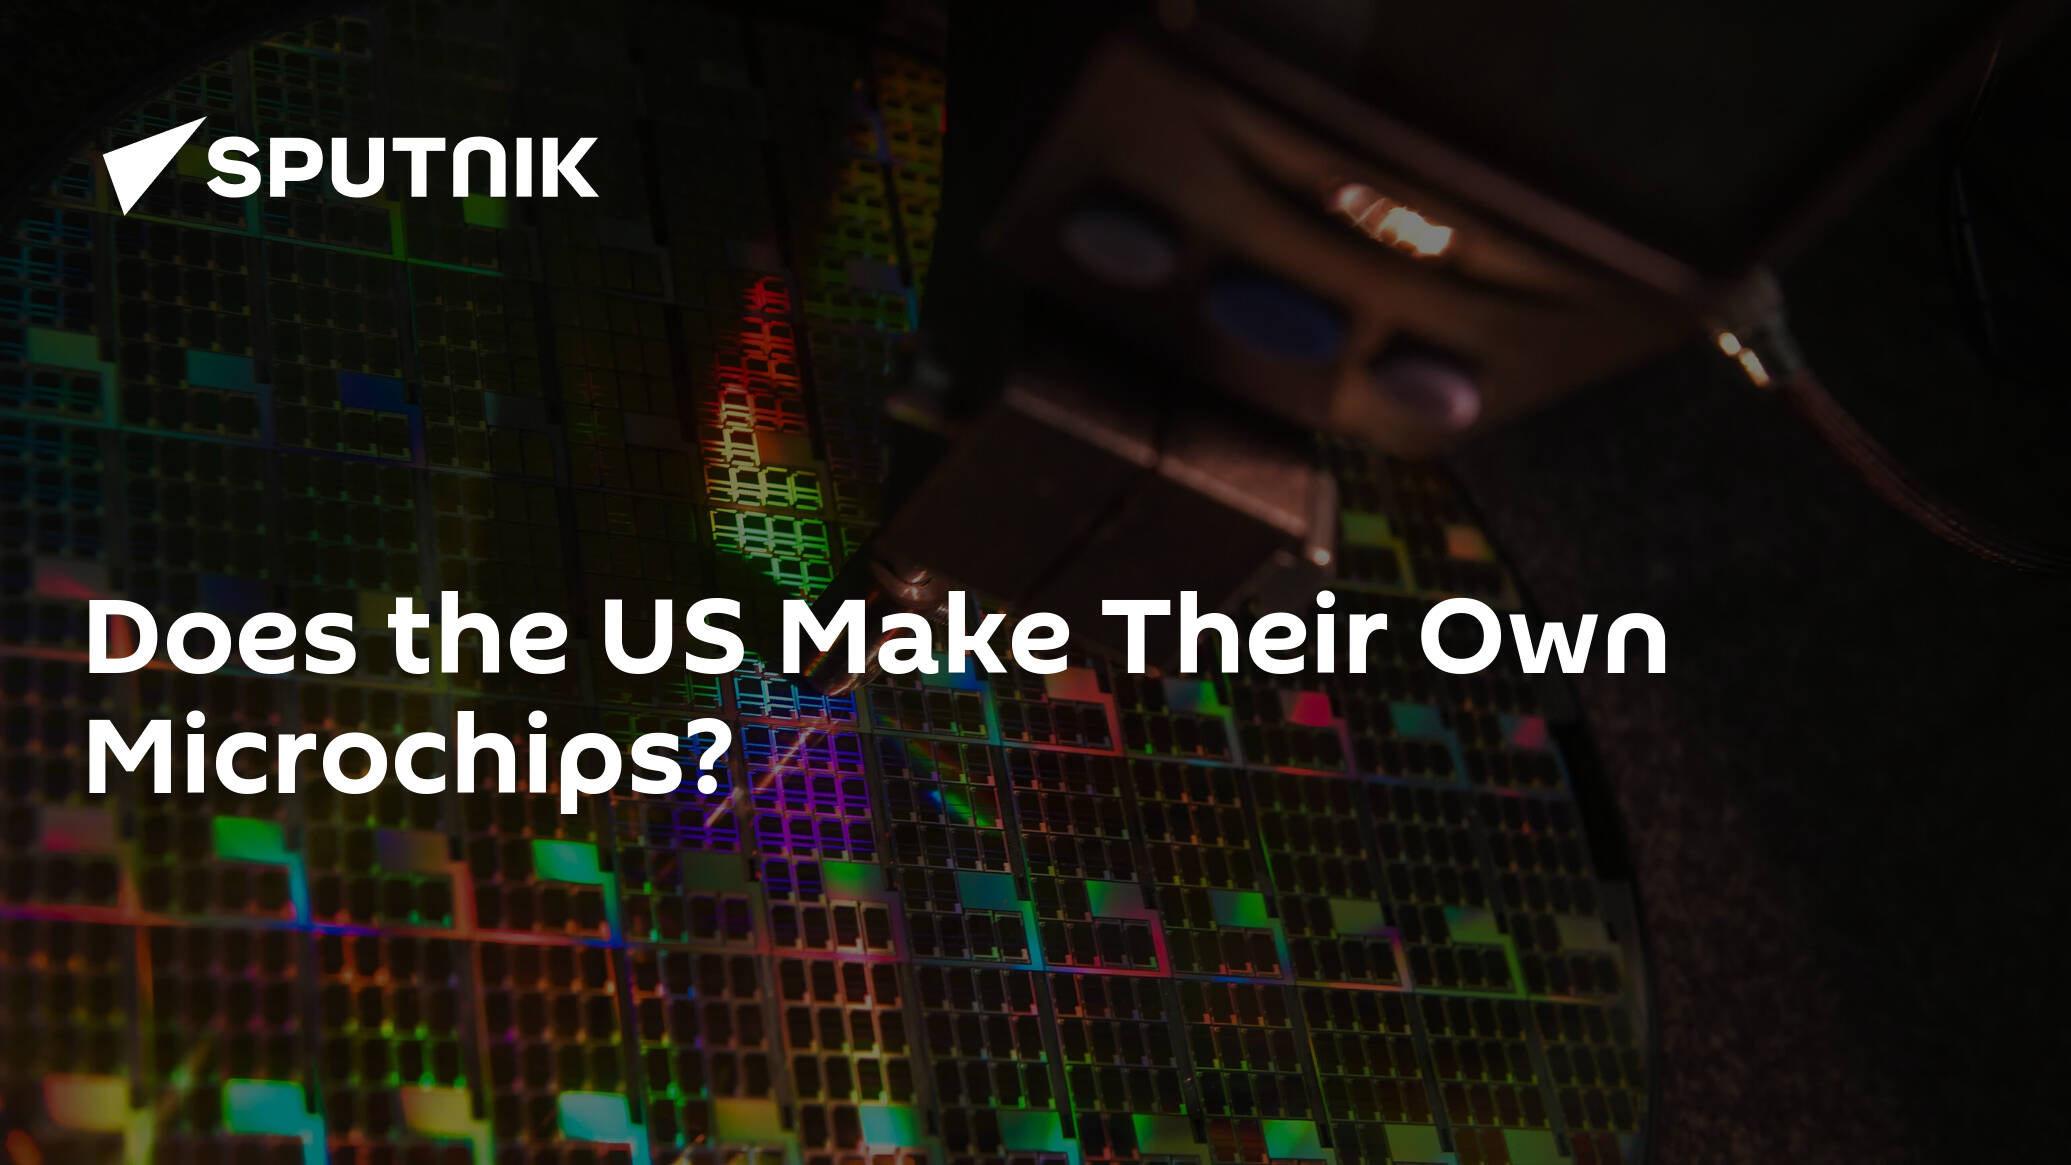 Does the US Make Their Own Microchips?